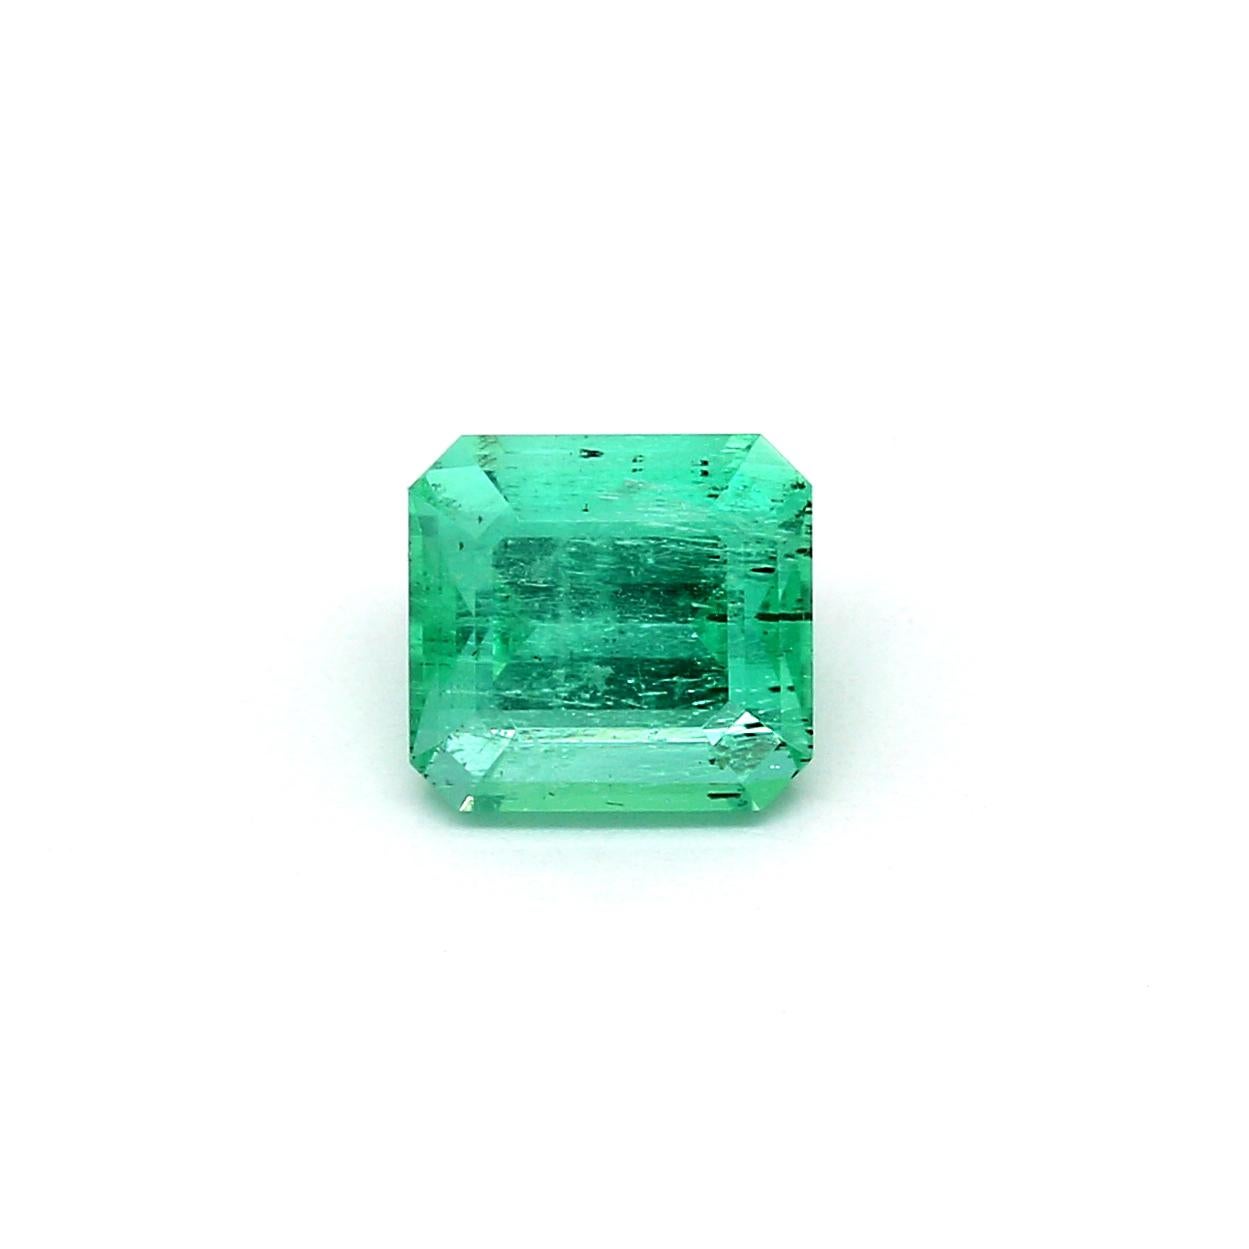 An amazing Russian Emerald which allows jewelers to create a unique piece of wearable art.
This exceptional quality gemstone would make a custom-made jewelry design. Perfect for a Ring or Pendant.

Shape - Octagon
Weight - 1.73 ct
Treatment - Minor